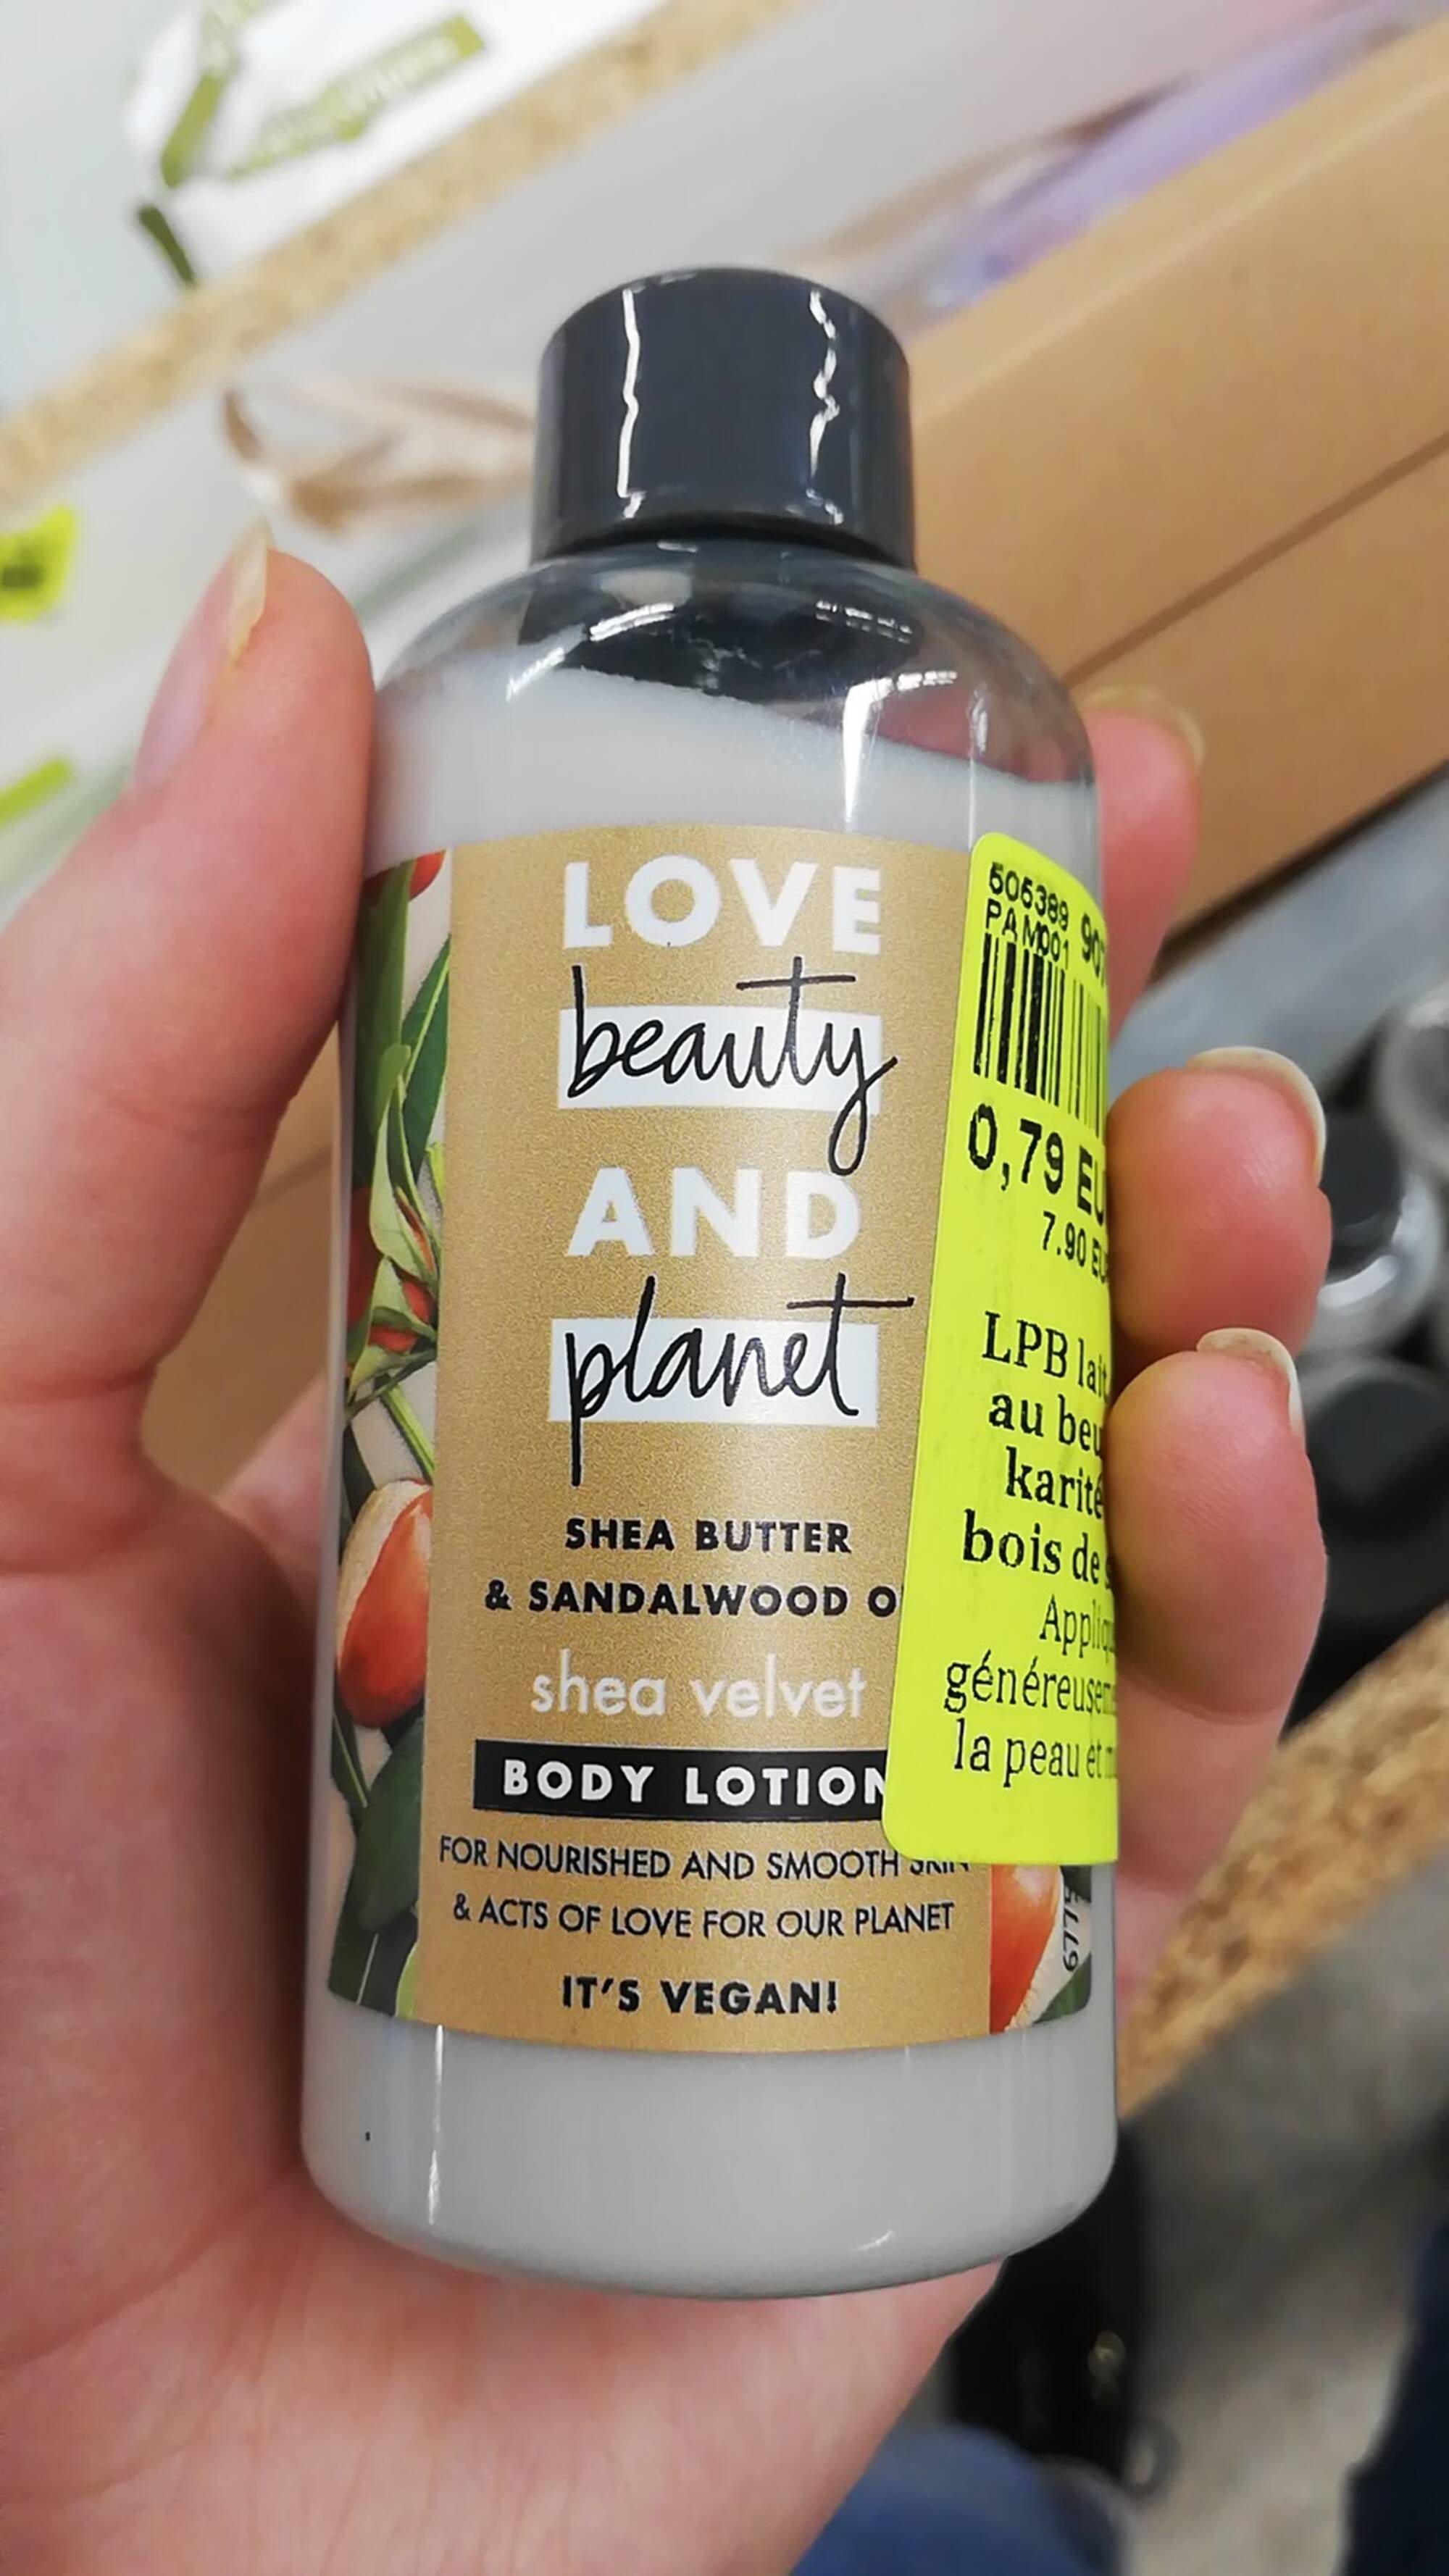 LOVE BEAUTY AND PLANET - Shea Butter & Sandalwood oil - Body Lotion